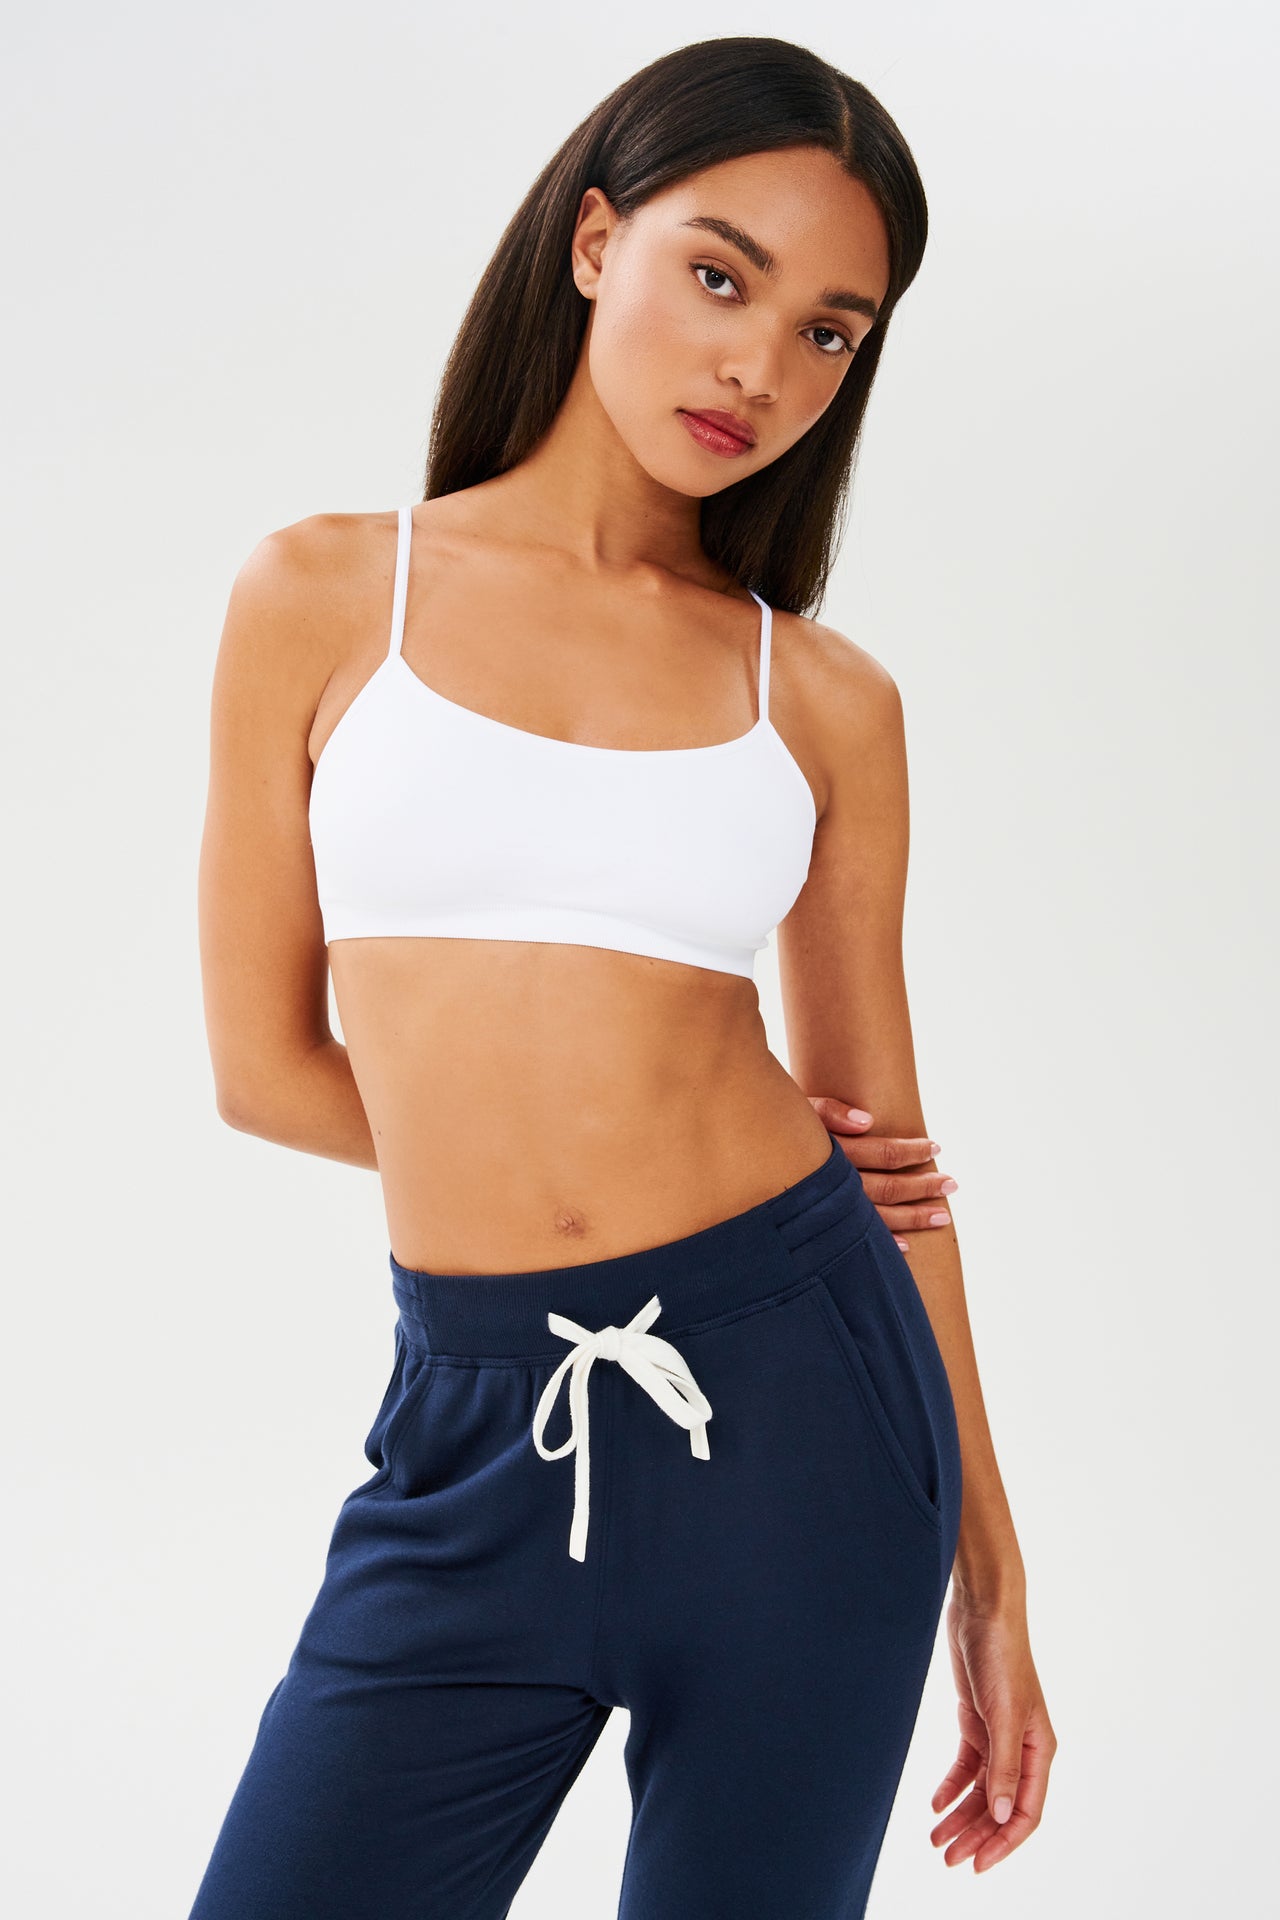 The model is wearing a Splits59 Loren Seamless Bra in White and navy sweatpants, perfect for gym workouts.